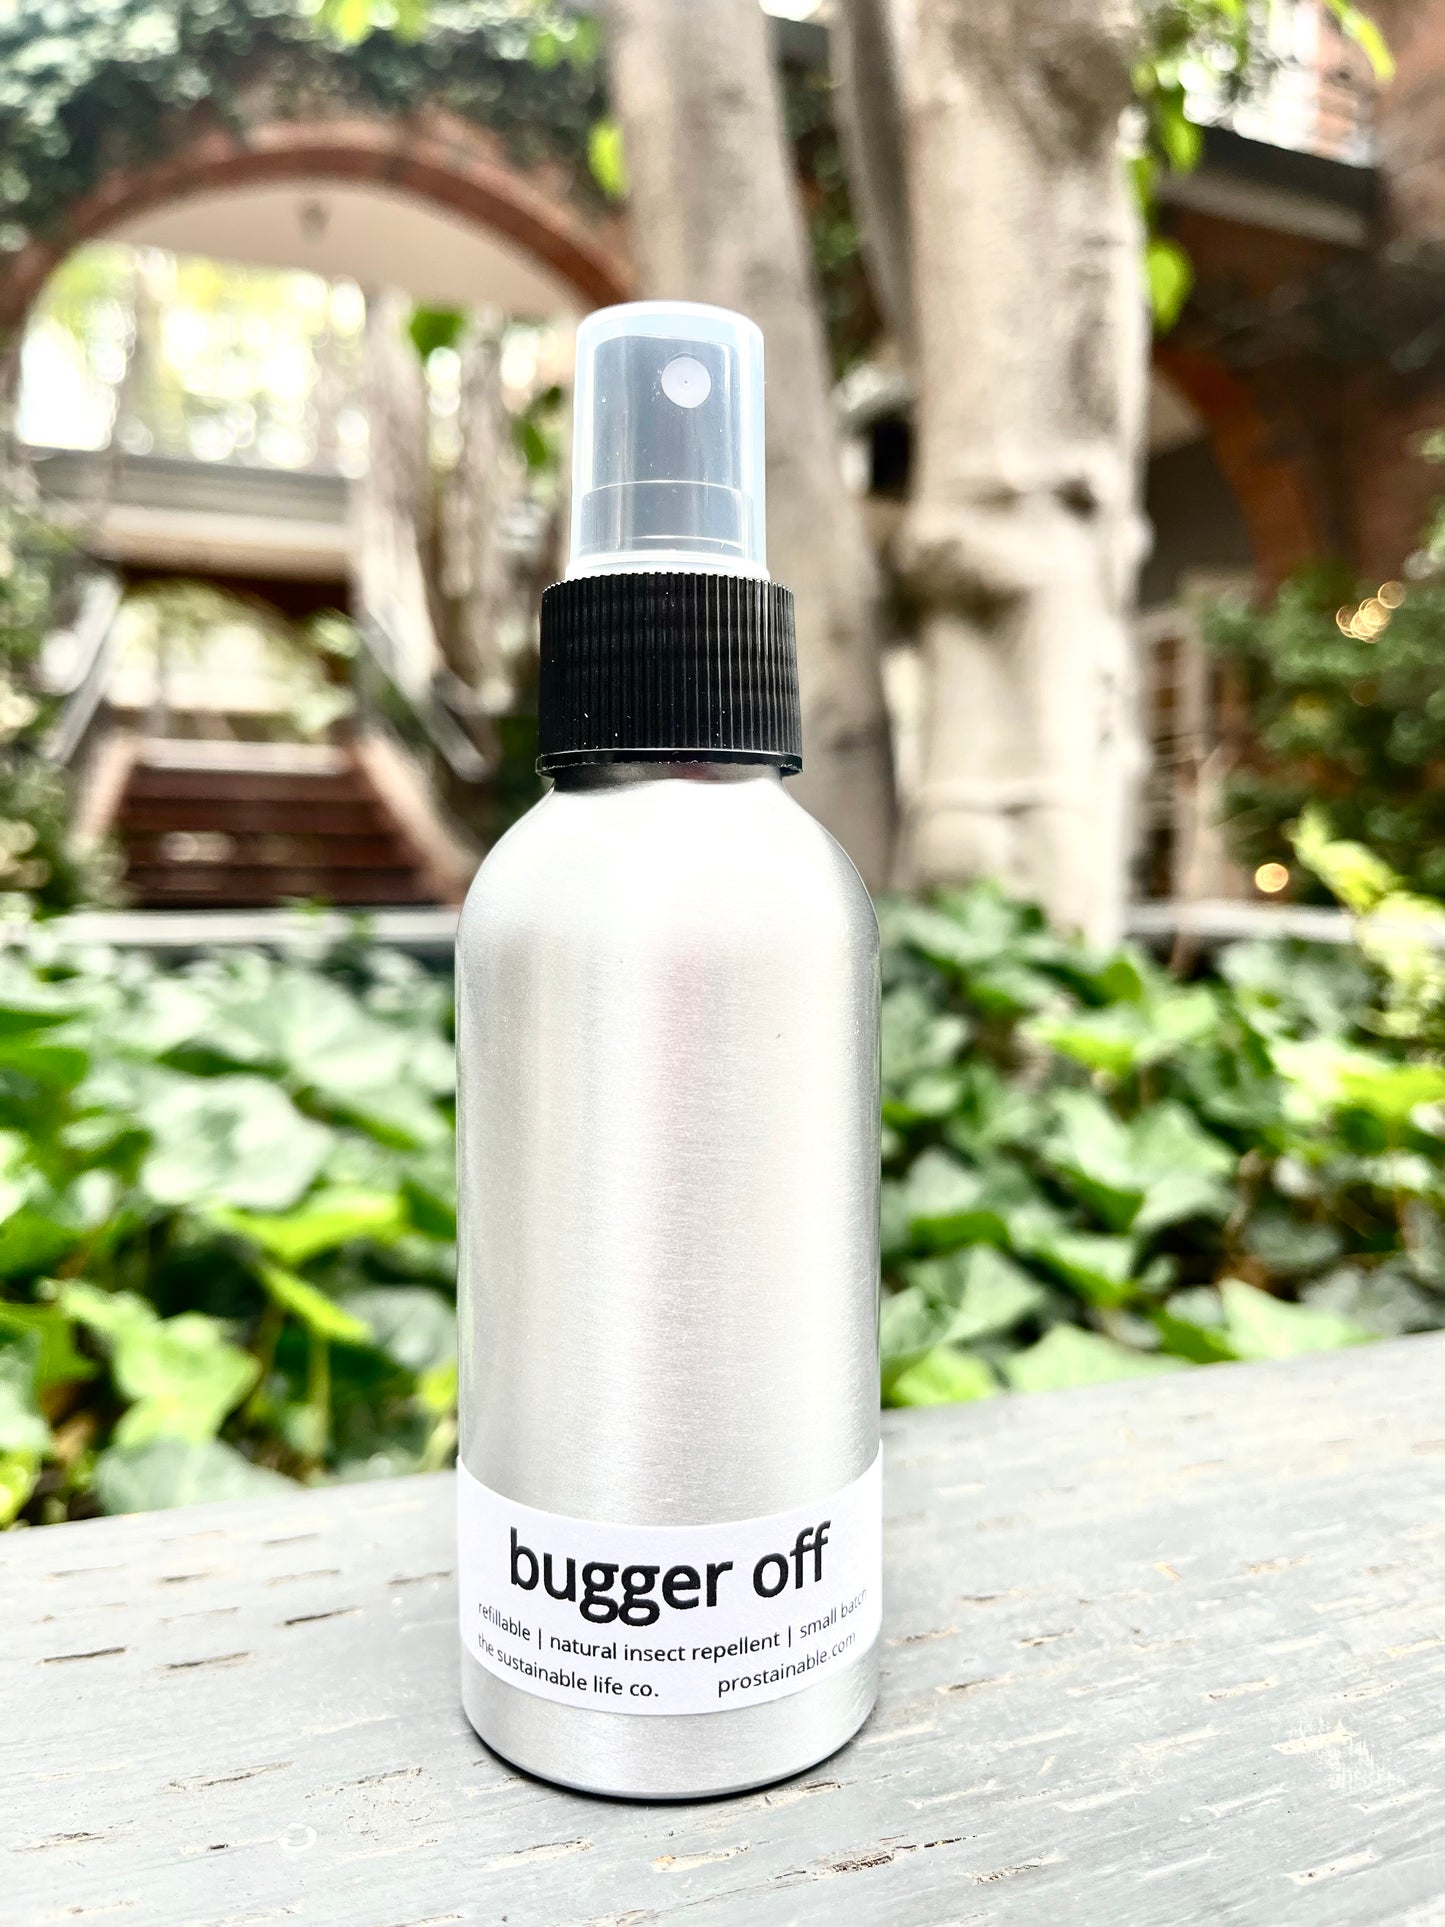 Bugger Off (natural insect repellent)